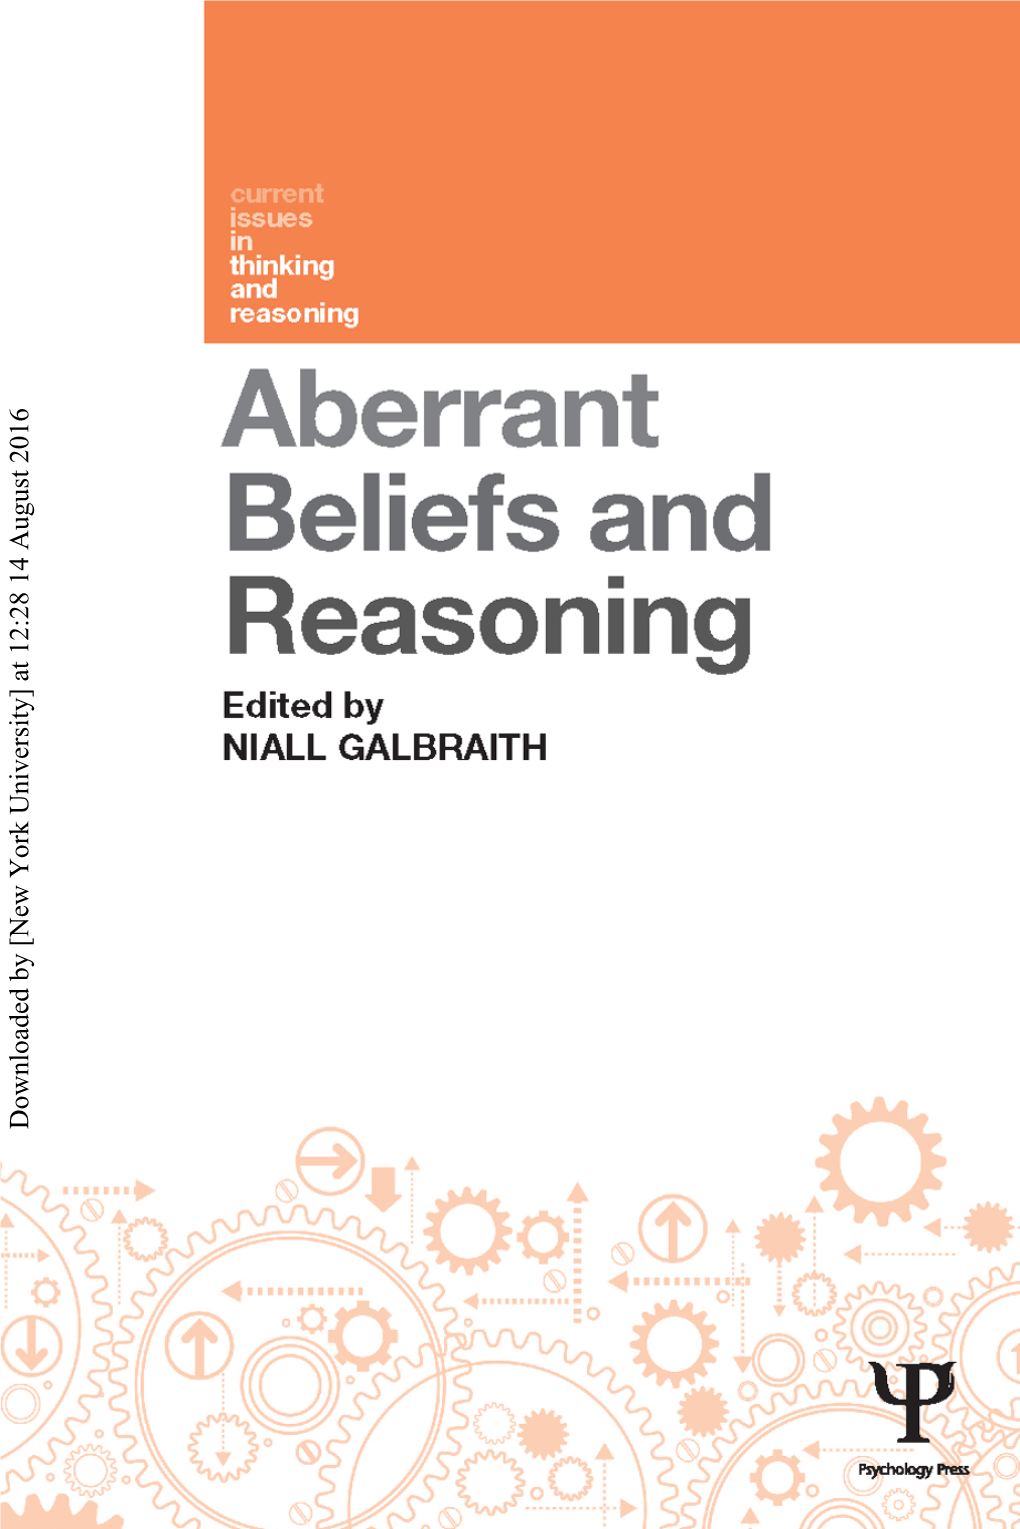 Aberrant Beliefs and Reasoning